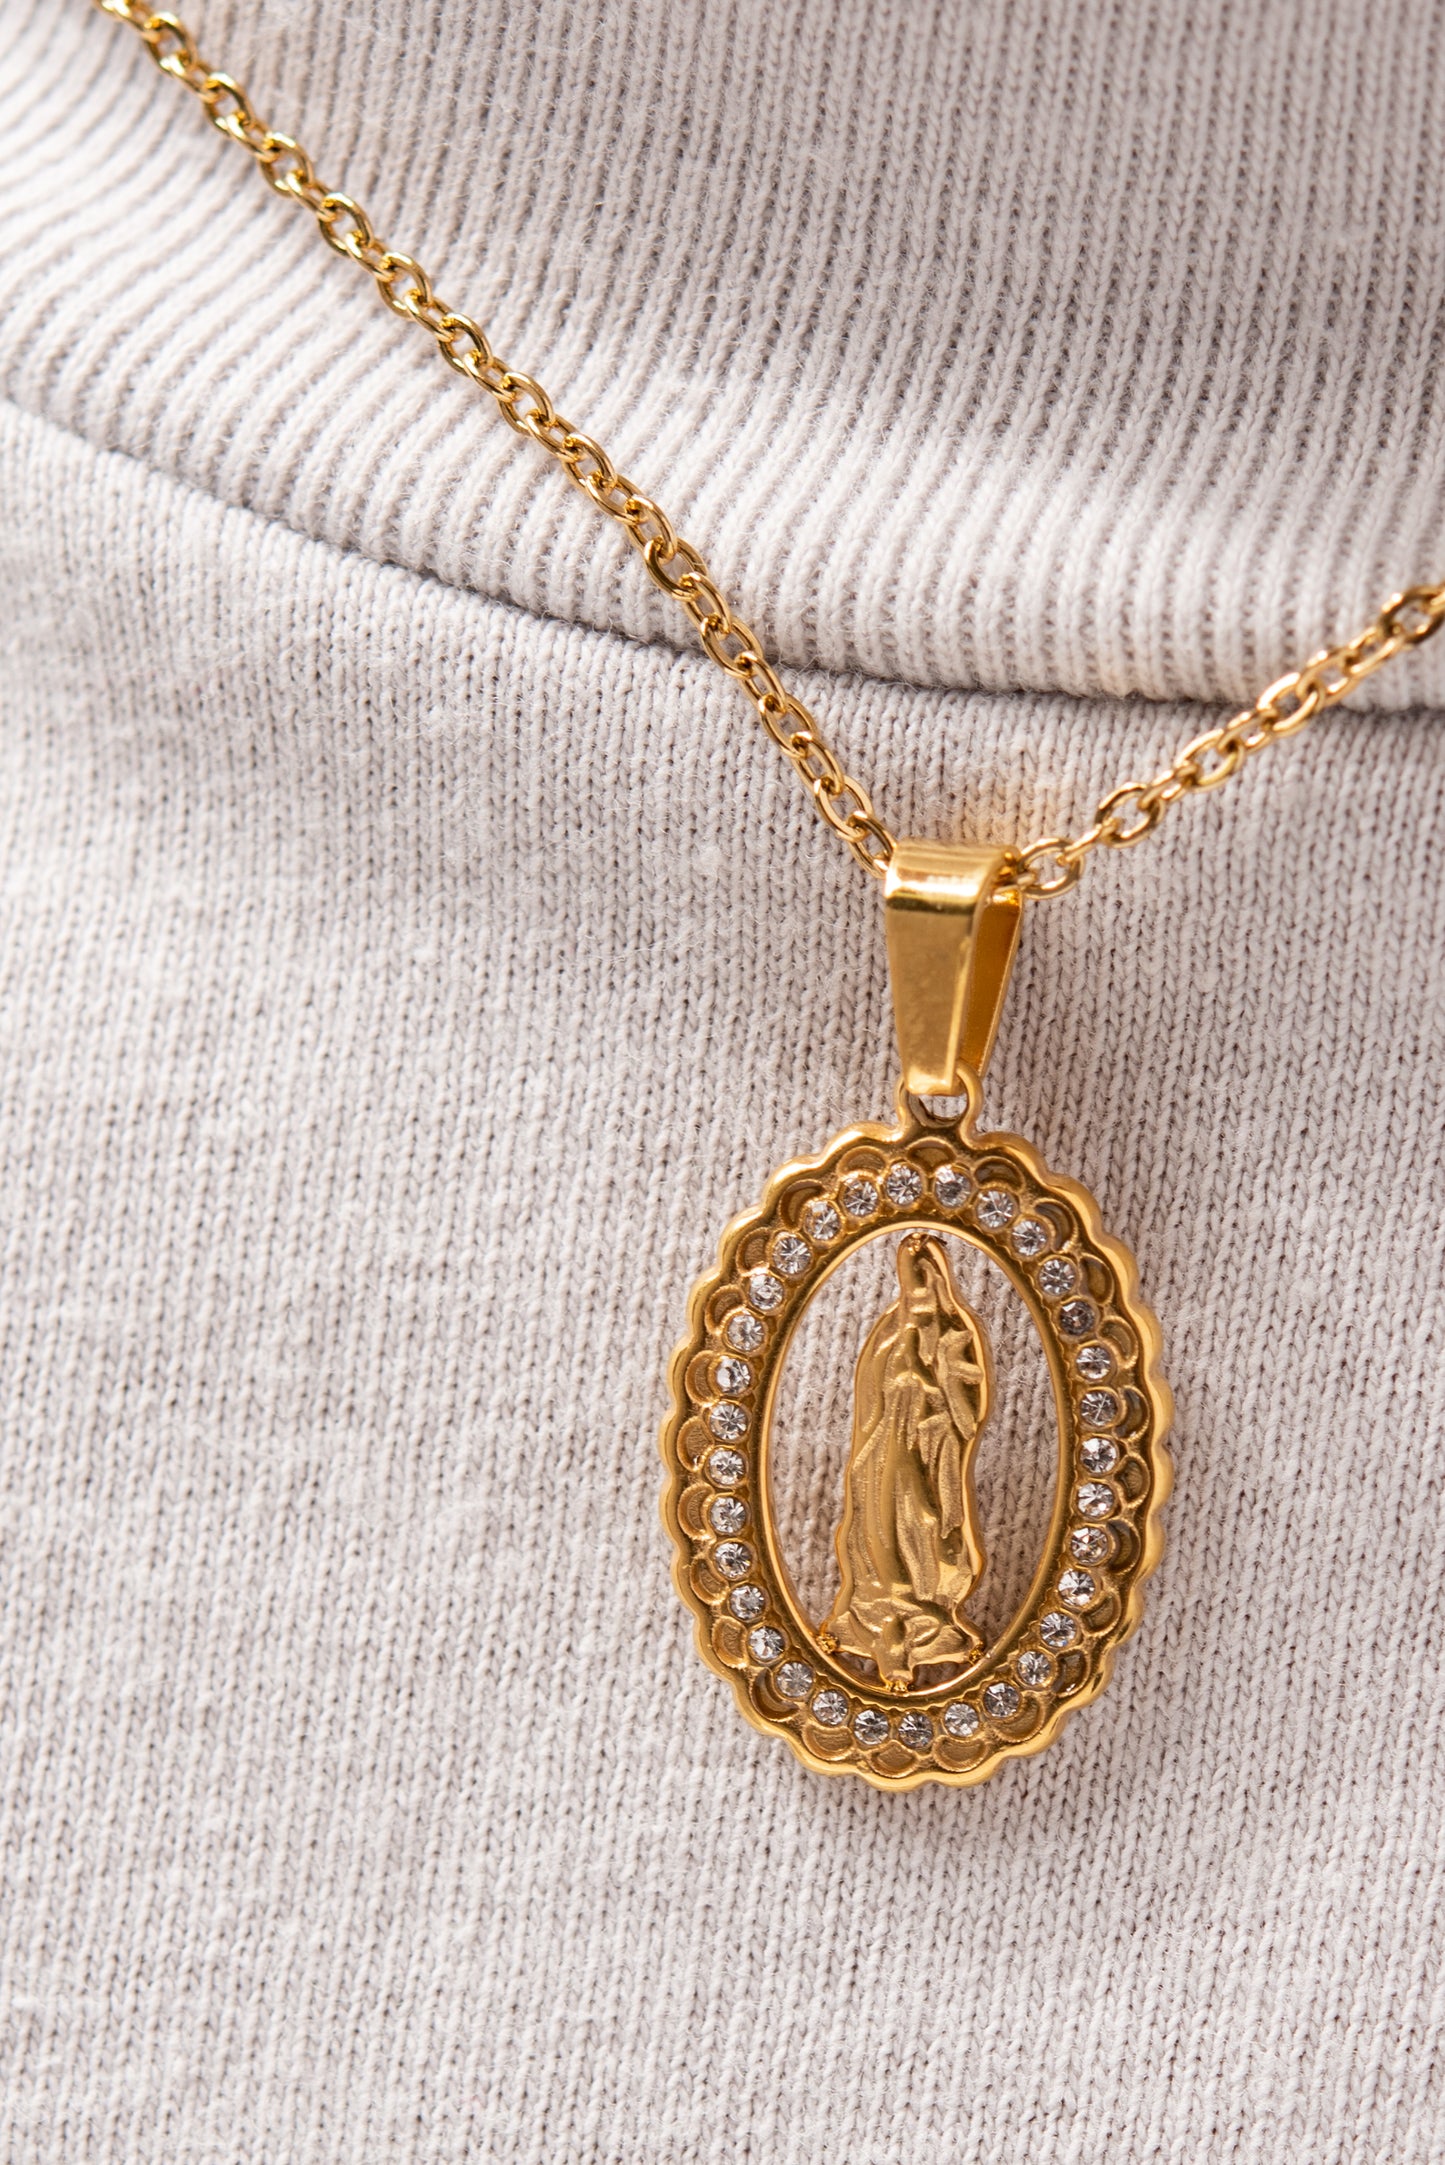 Stainless Steel Virgin Mary Pendant Cable Chain Link Necklace